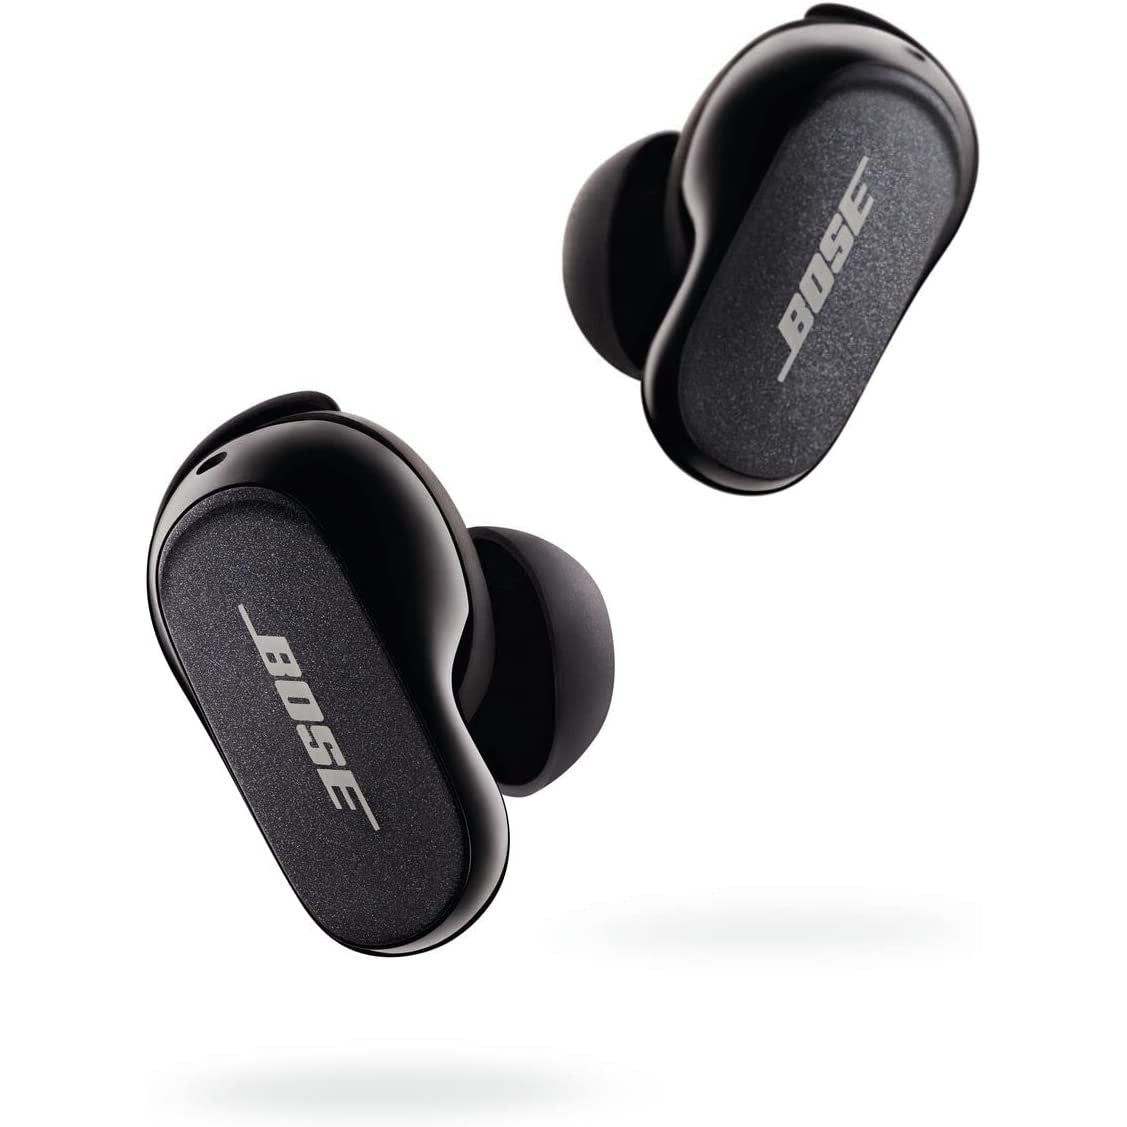 Bose QuietComfort II Wireless Noise-Cancelling Earbuds - Triple Black - Refurbished Excellent